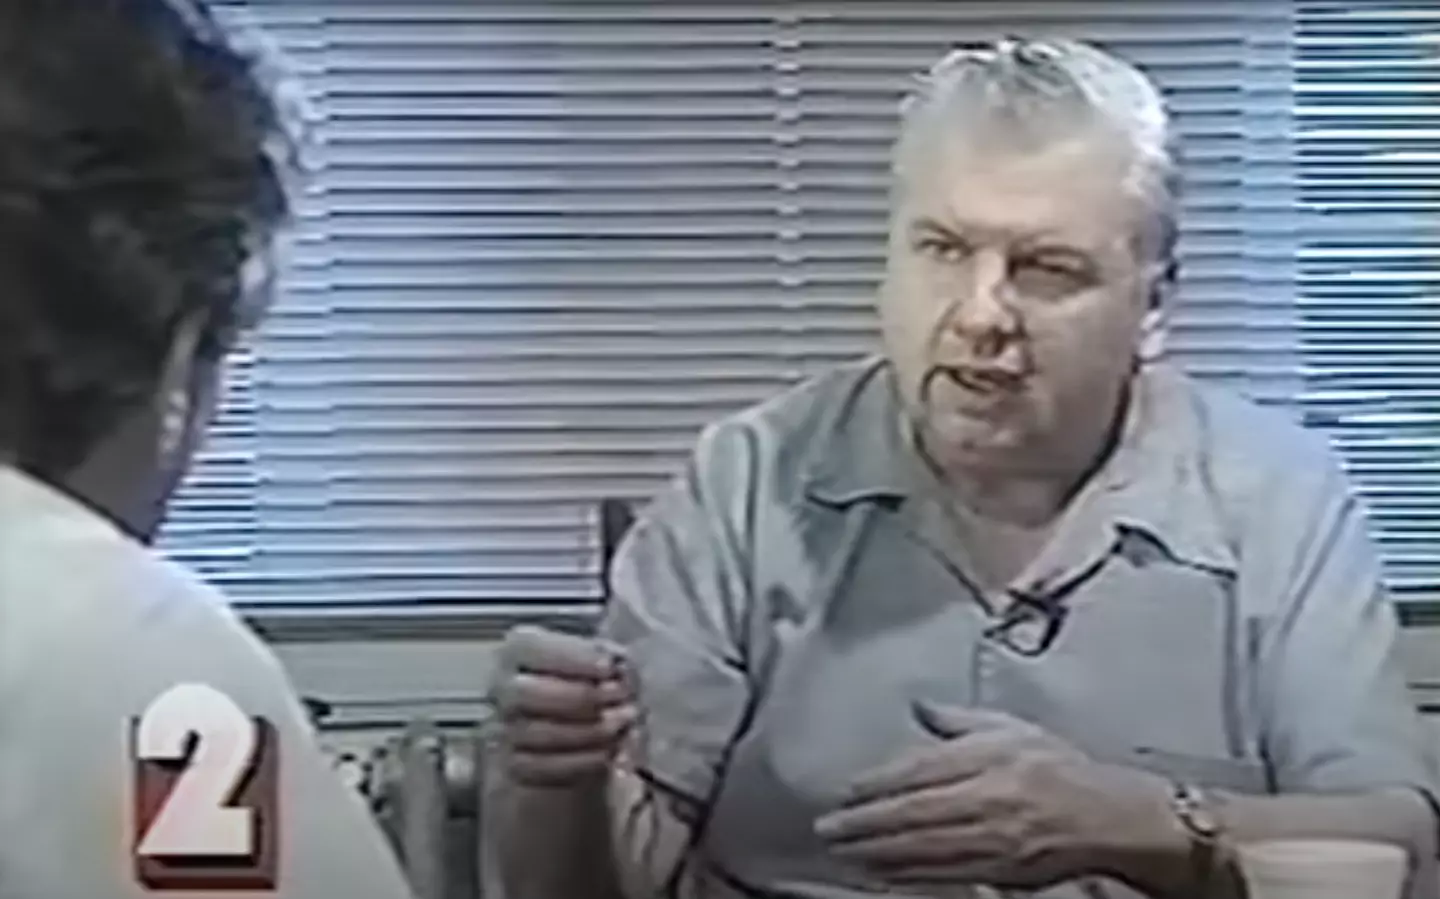 Gacy used the journalist's arm to demonstrate the knot.